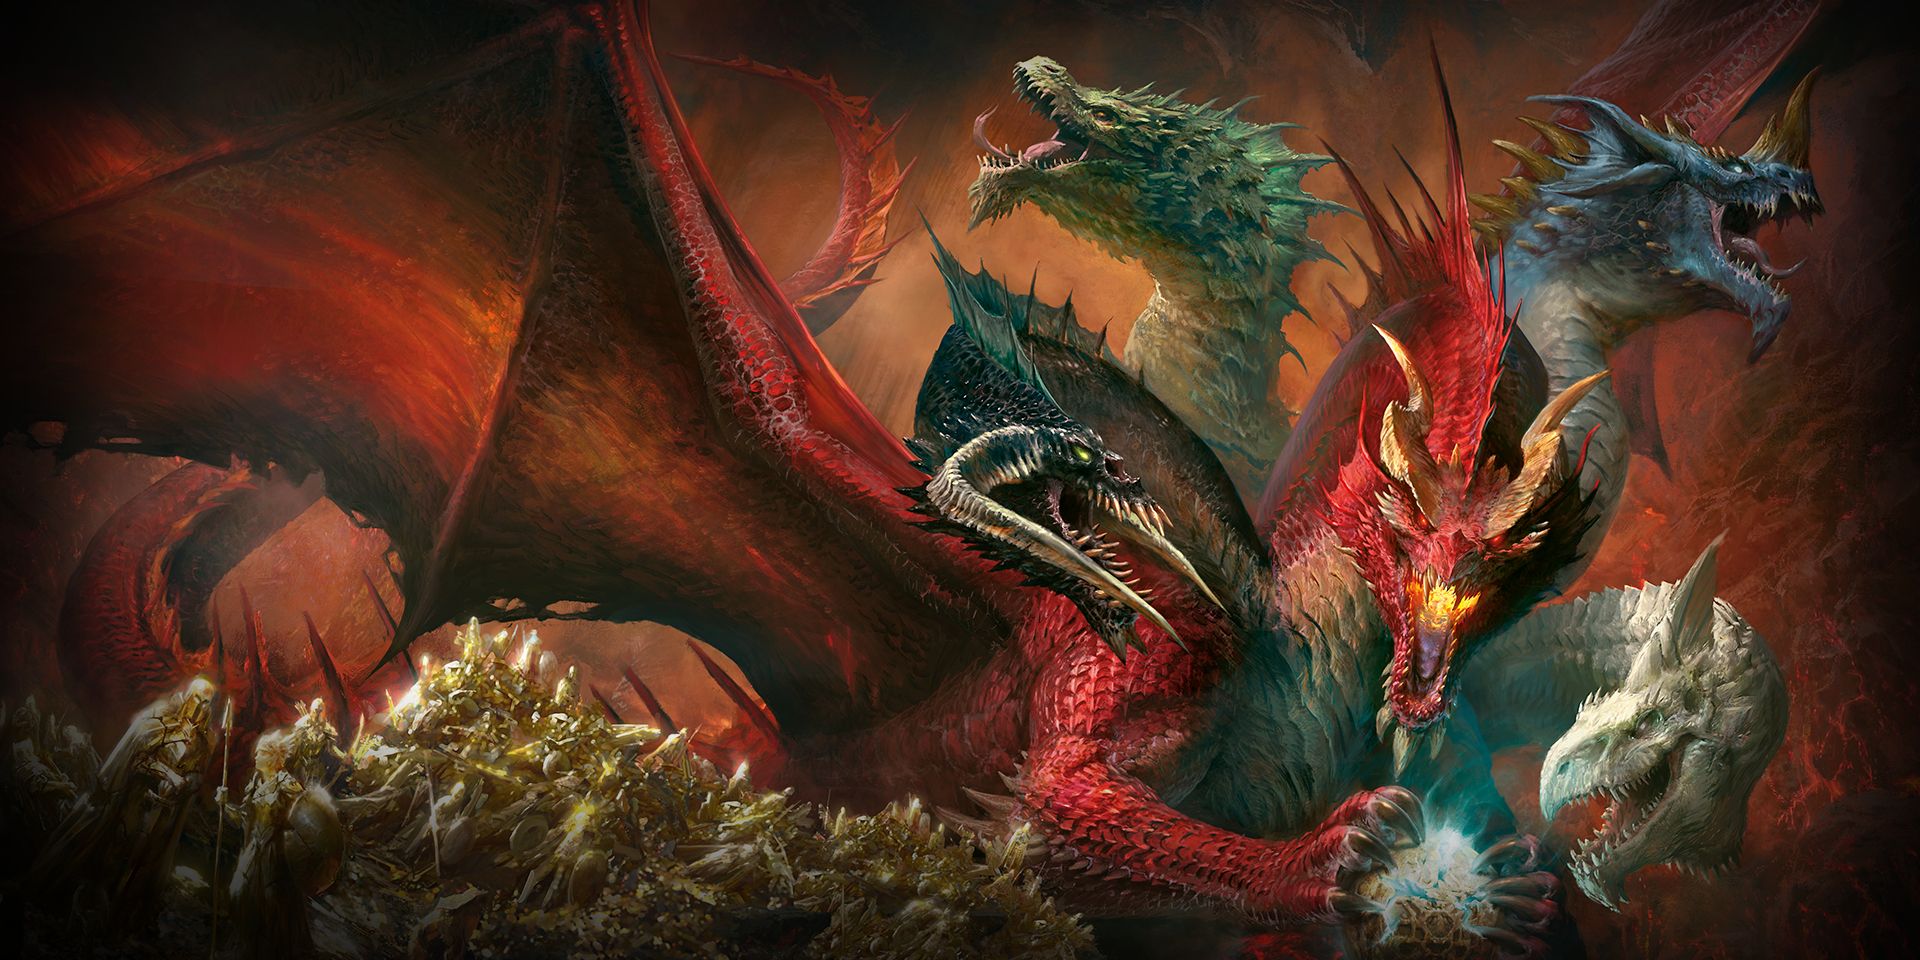 A multi-headed, multi-colored dragon clutching a glowing orb in official art from the D&D campaign Tyranny of Dragons.